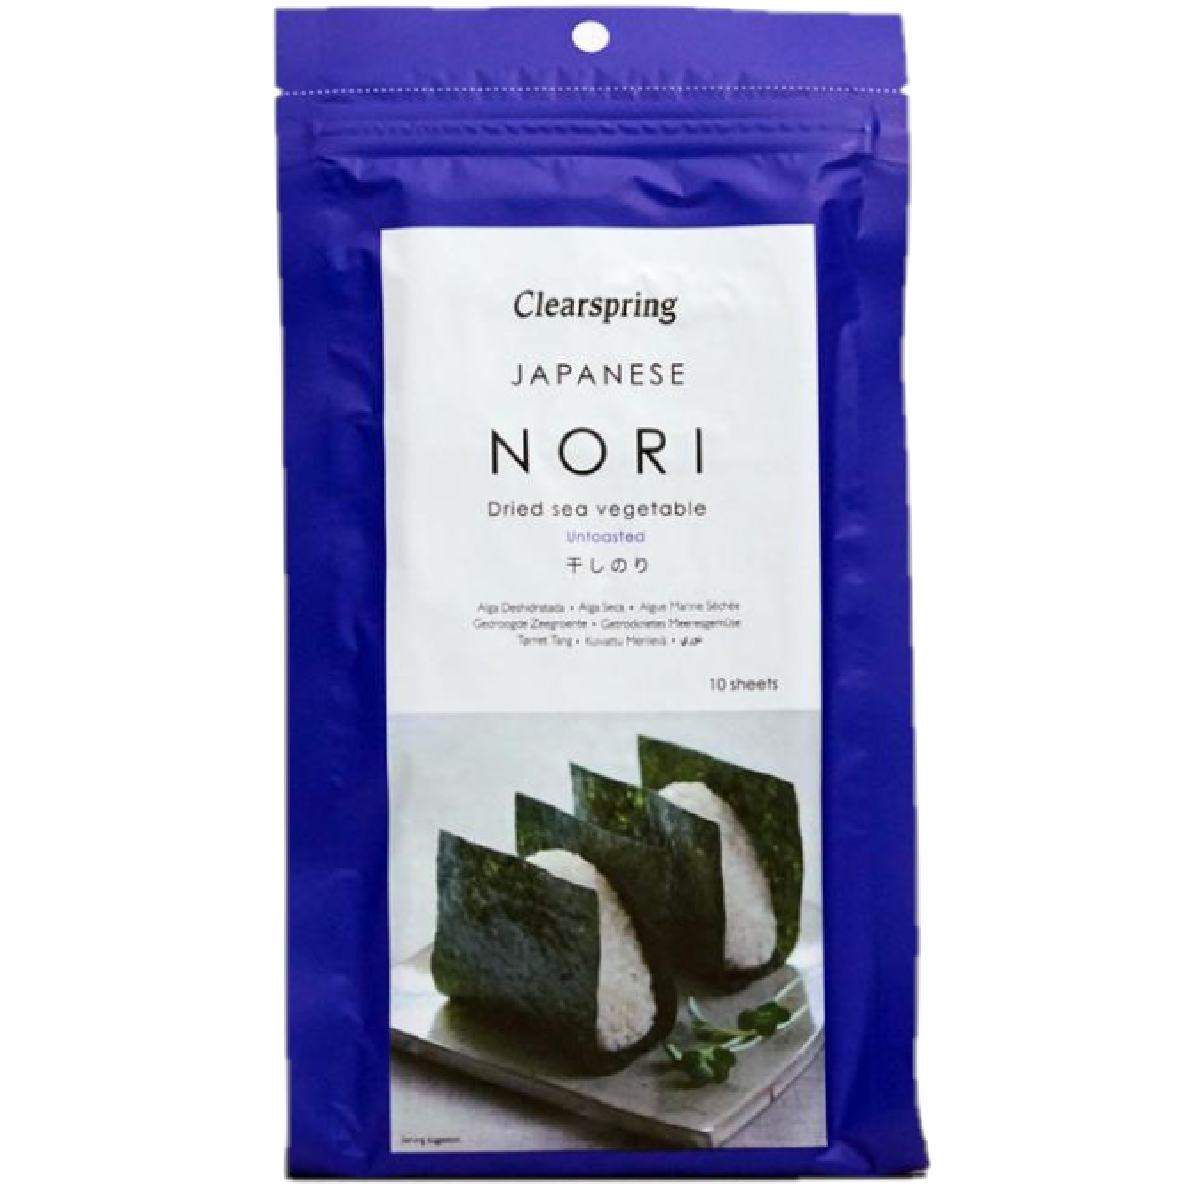 Clearspring Japanese Nori Dried Sea Vegetable Untoasted 25g